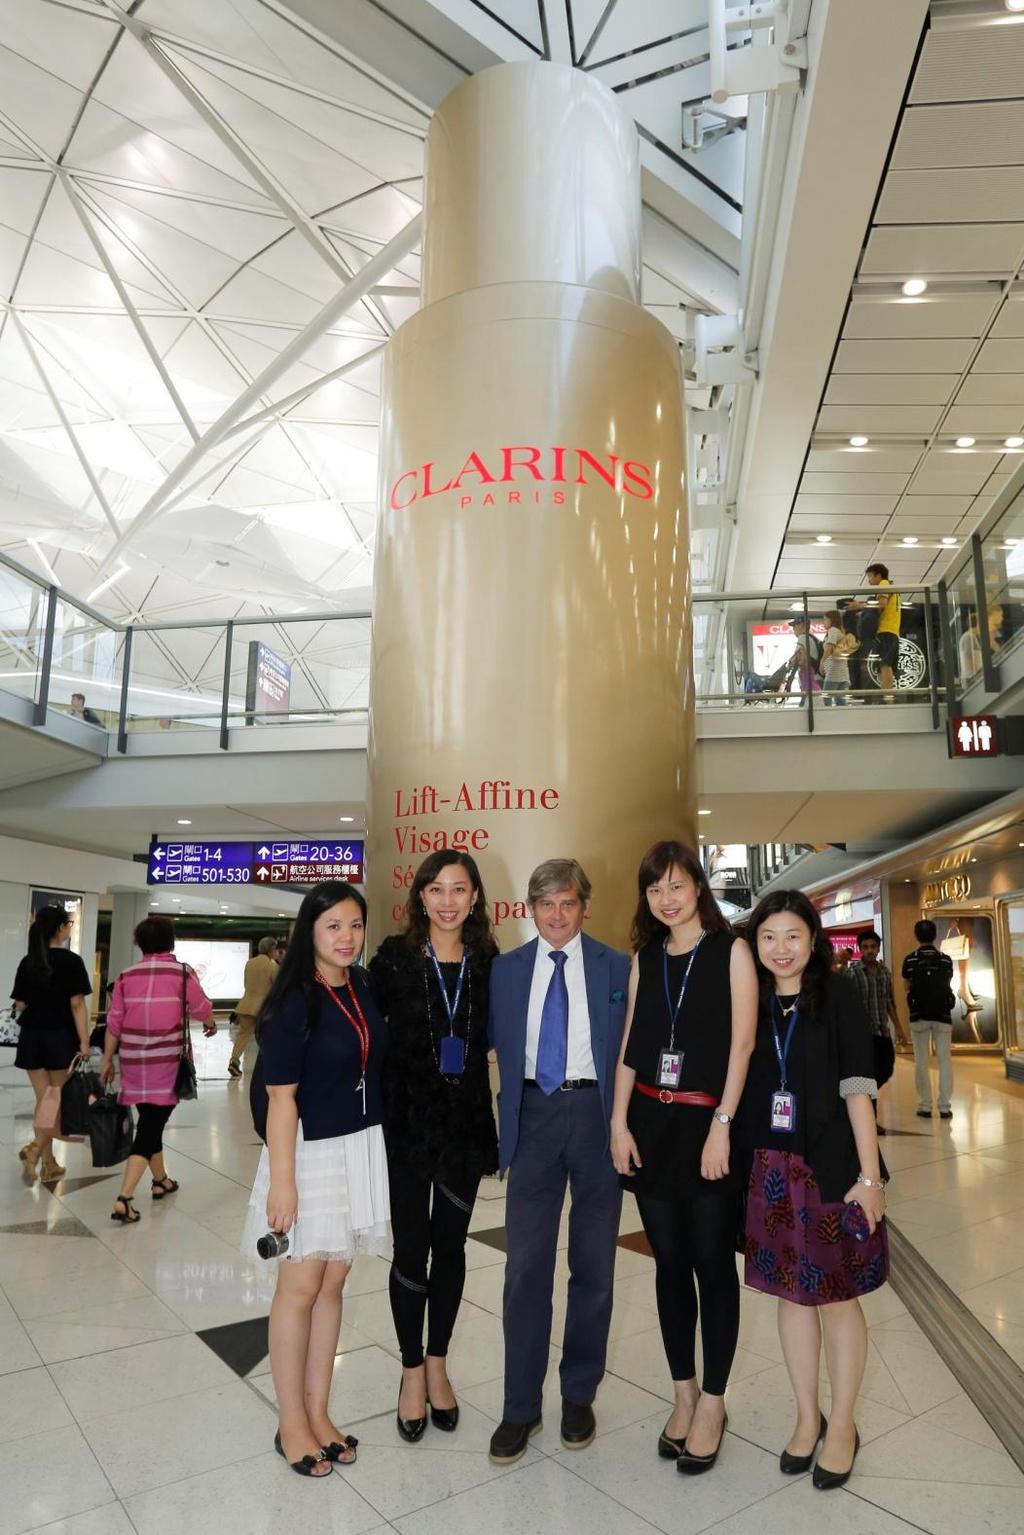 Fig. 6 The valuable partnership between Clarins and JCDecaux (From left to right) 1. Ms. Christine Chan, Travel Retail Field Manager, HK & Macau, Clarins 2. Ms. Shirley Chan, General Manager, JCDecaux Transport 3.